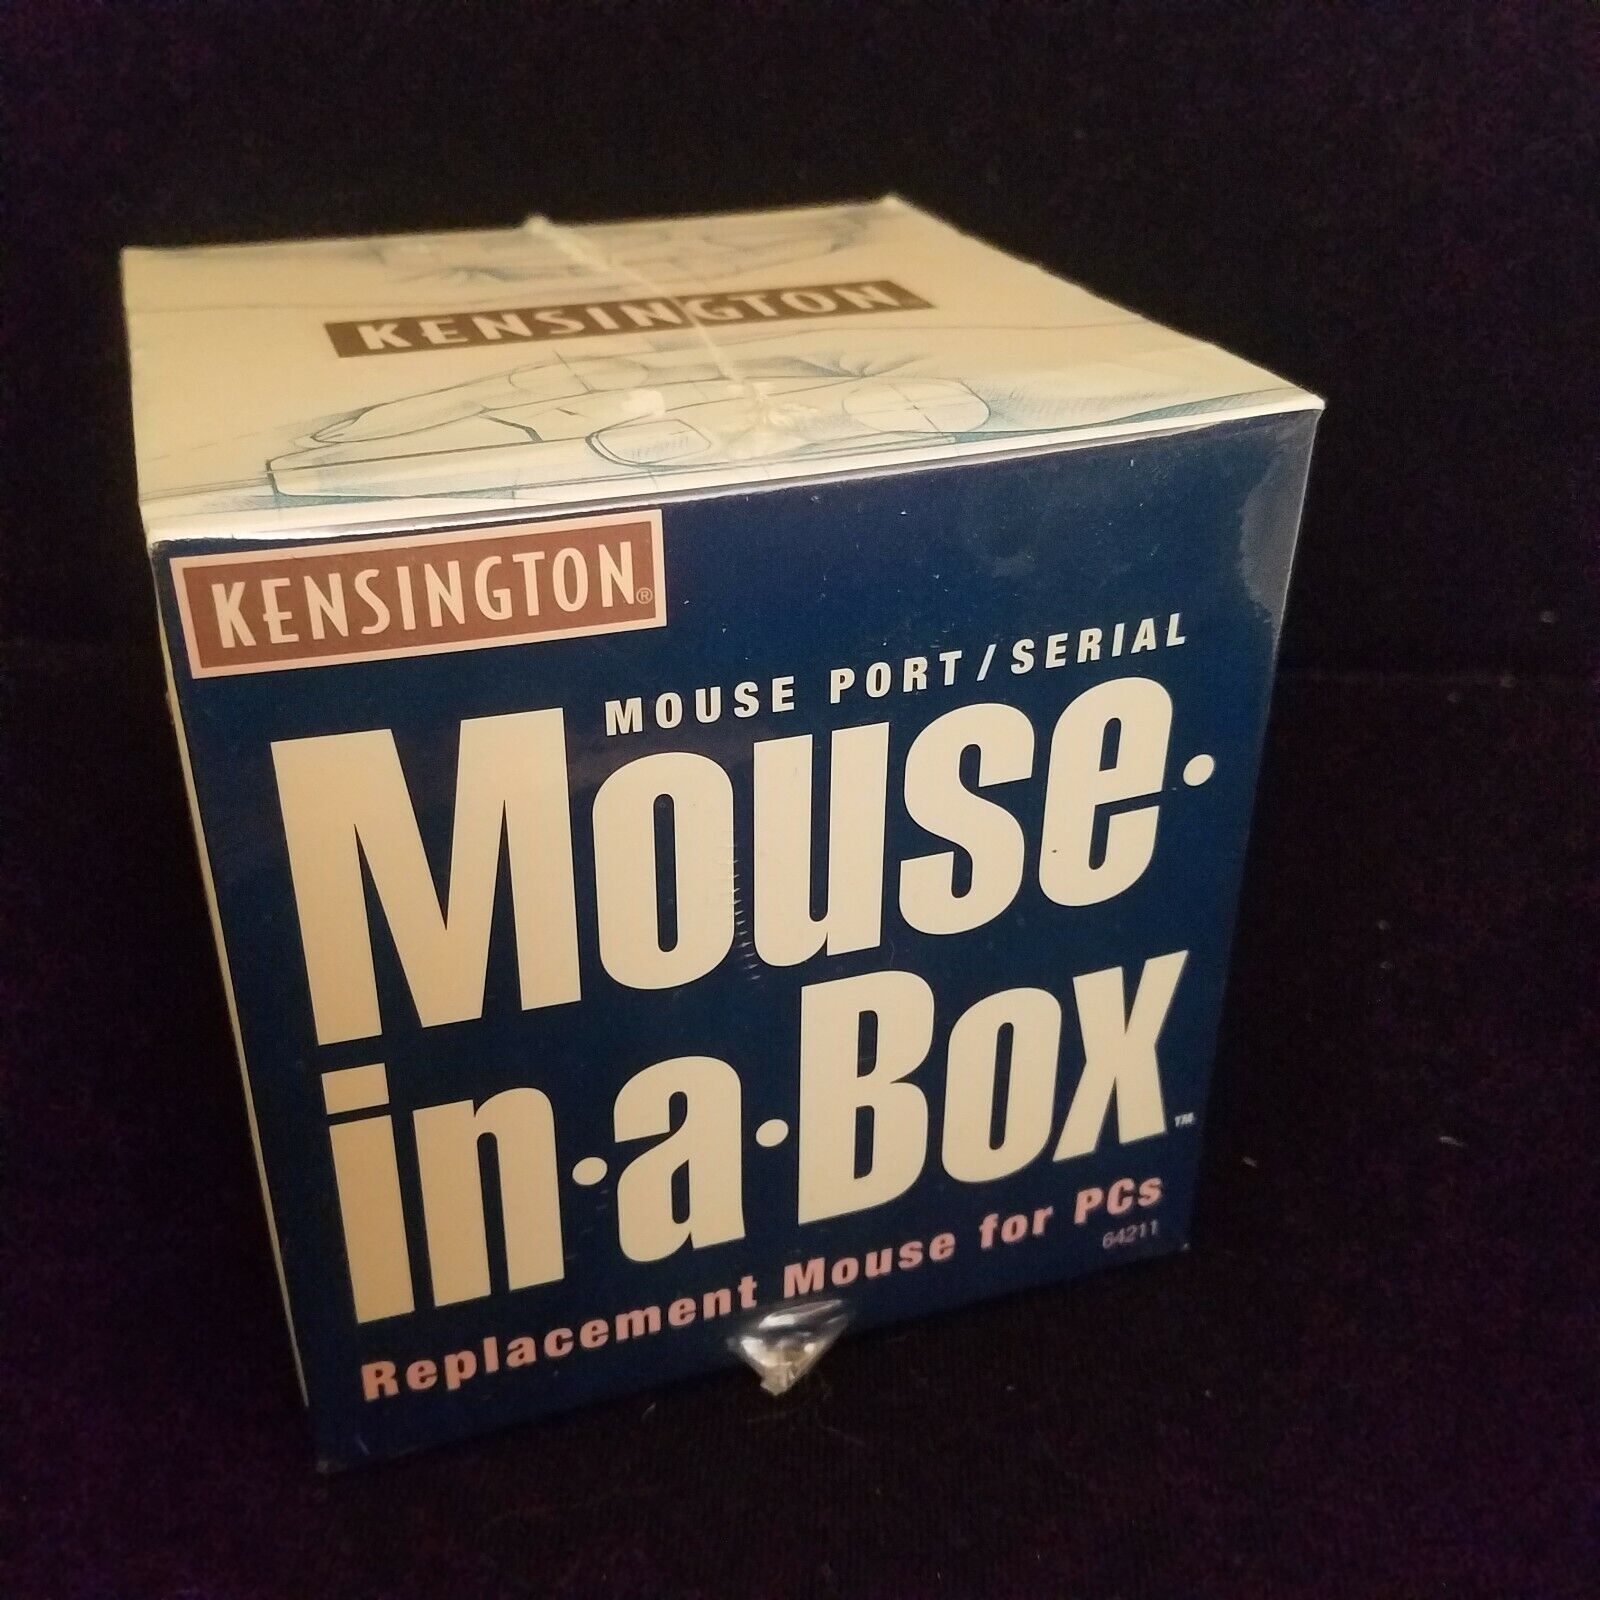 New Vintage Kensington Mouse in a Box Model 64211 Replacement Mouse For PCs